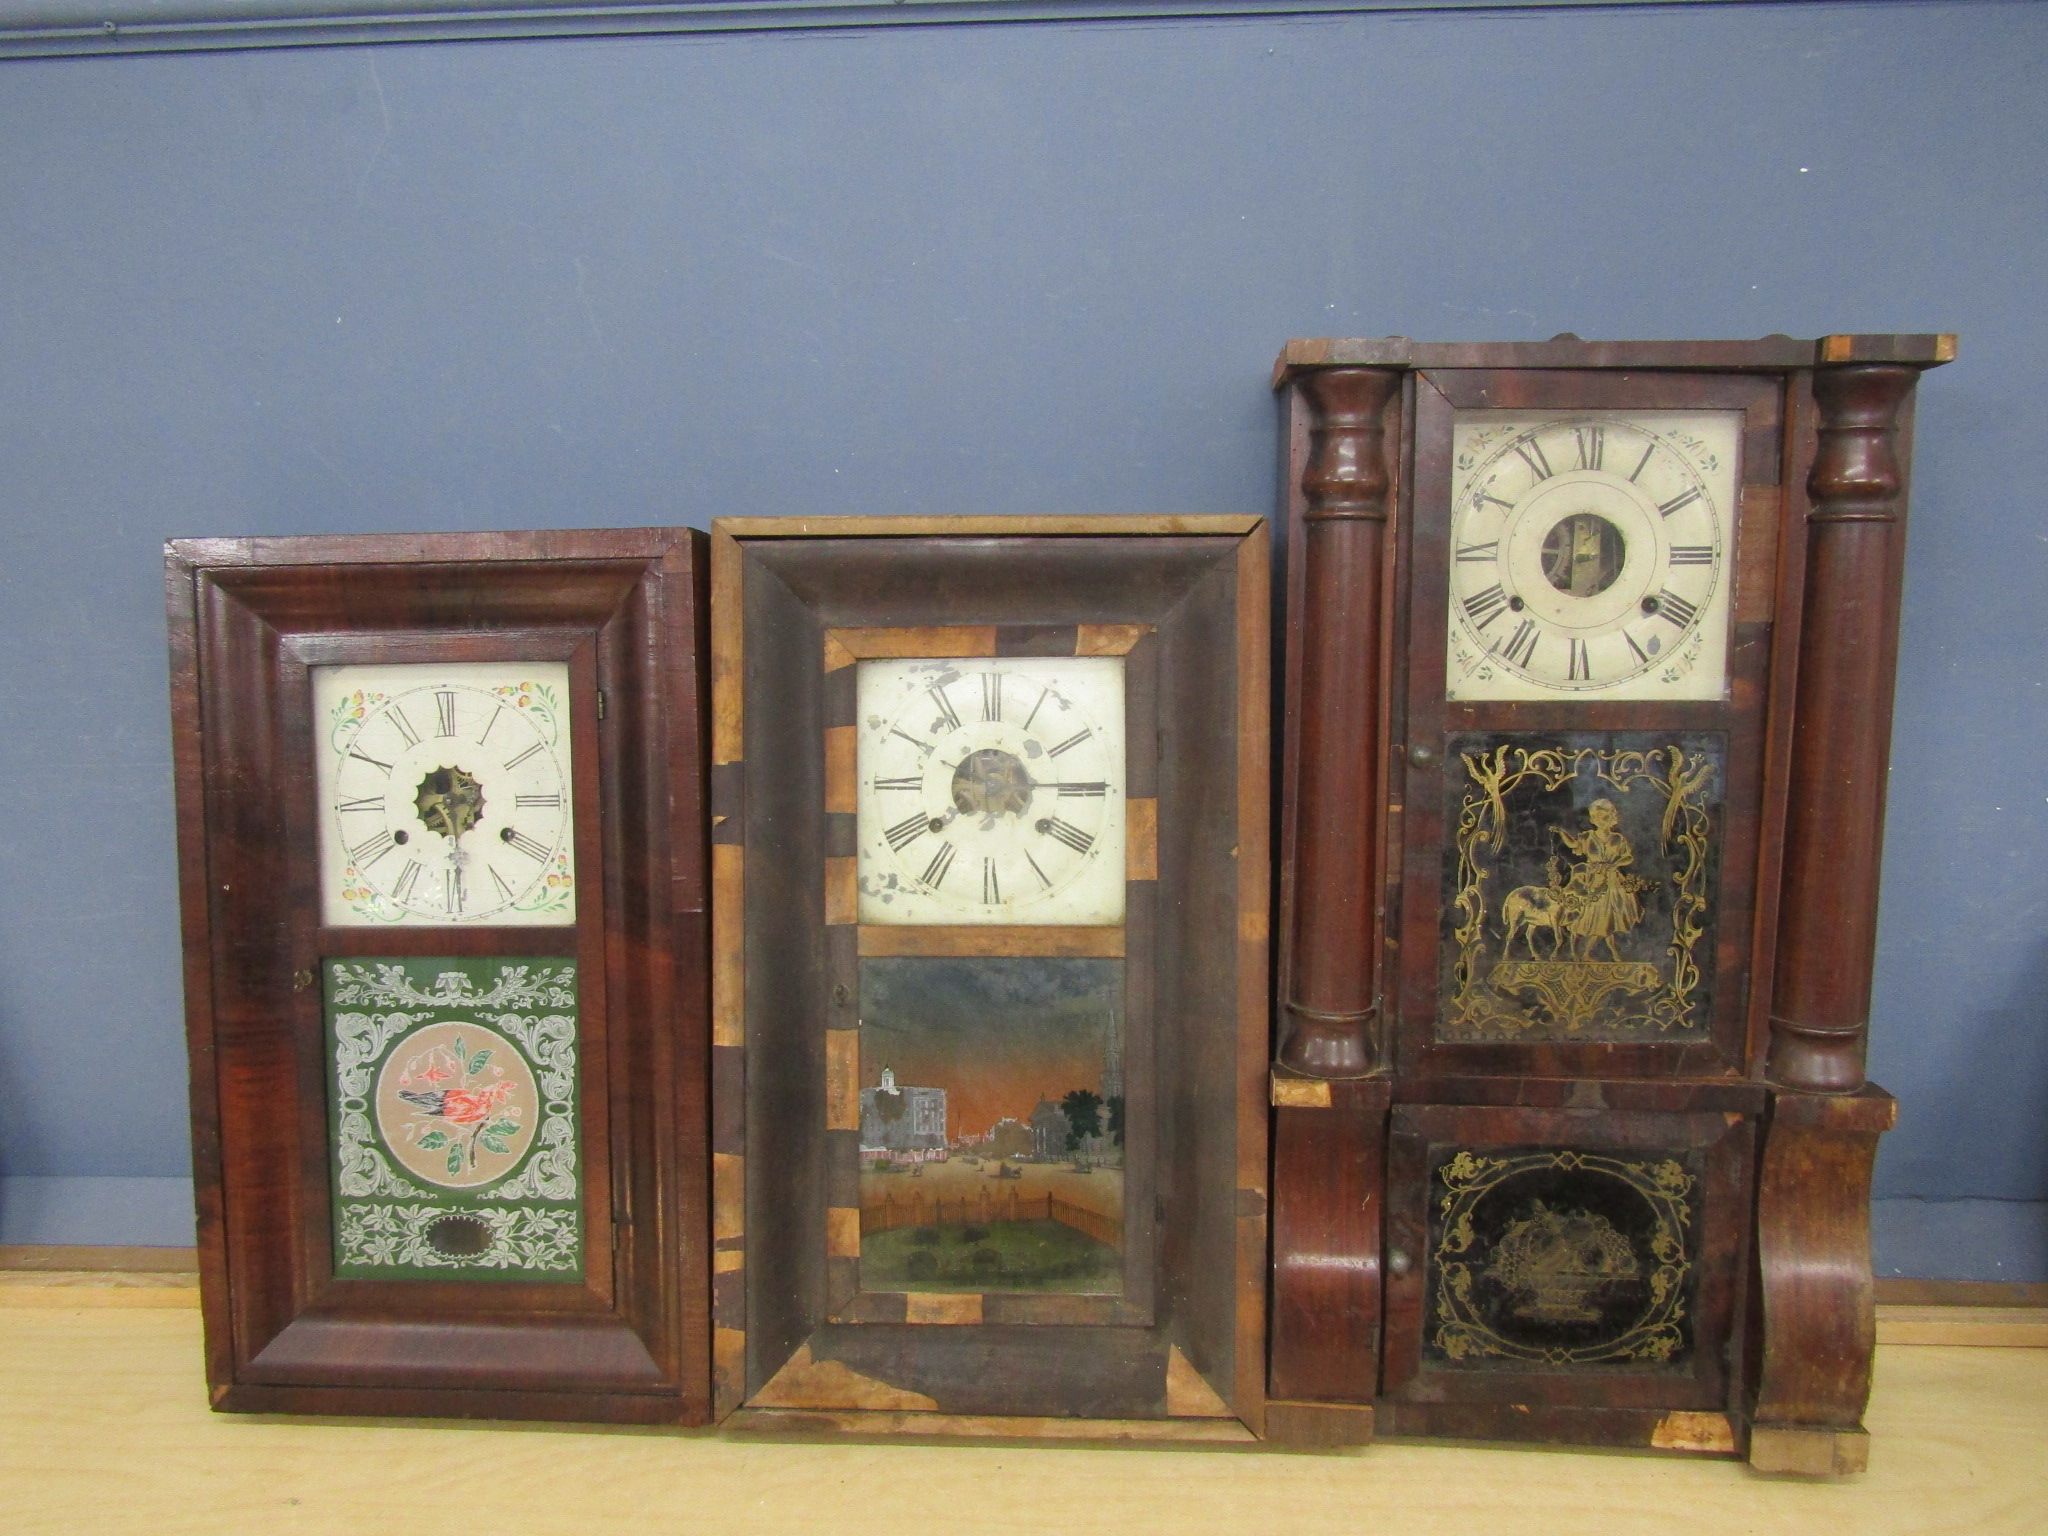 3 American Ogee wall clocks (all in need of some restoration)